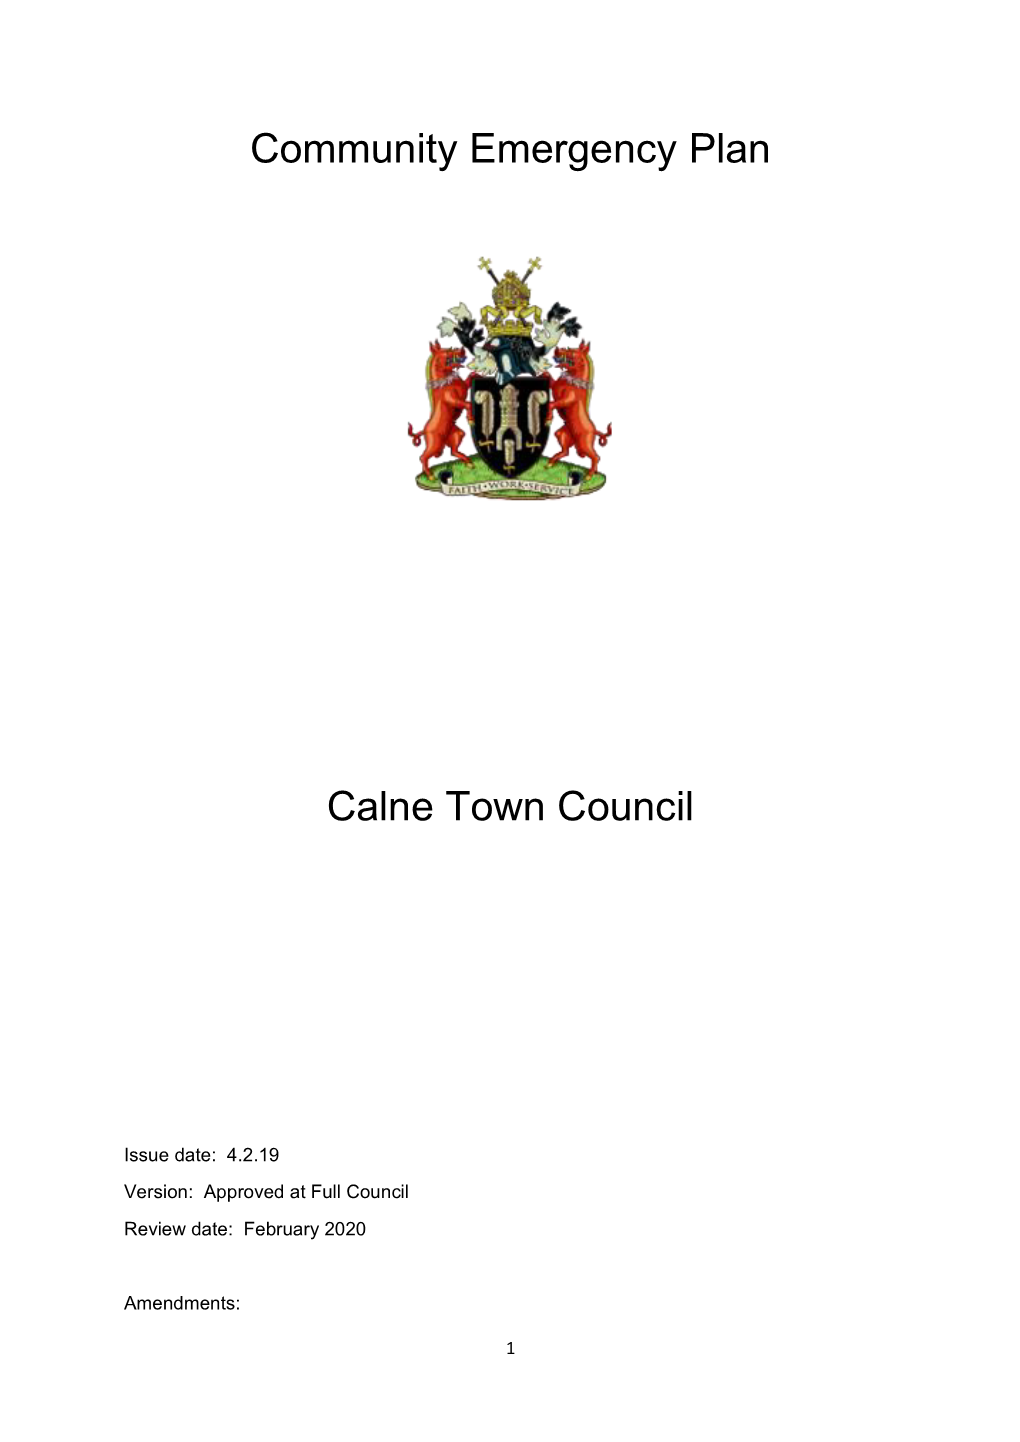 Community Emergency Plan Calne Town Council